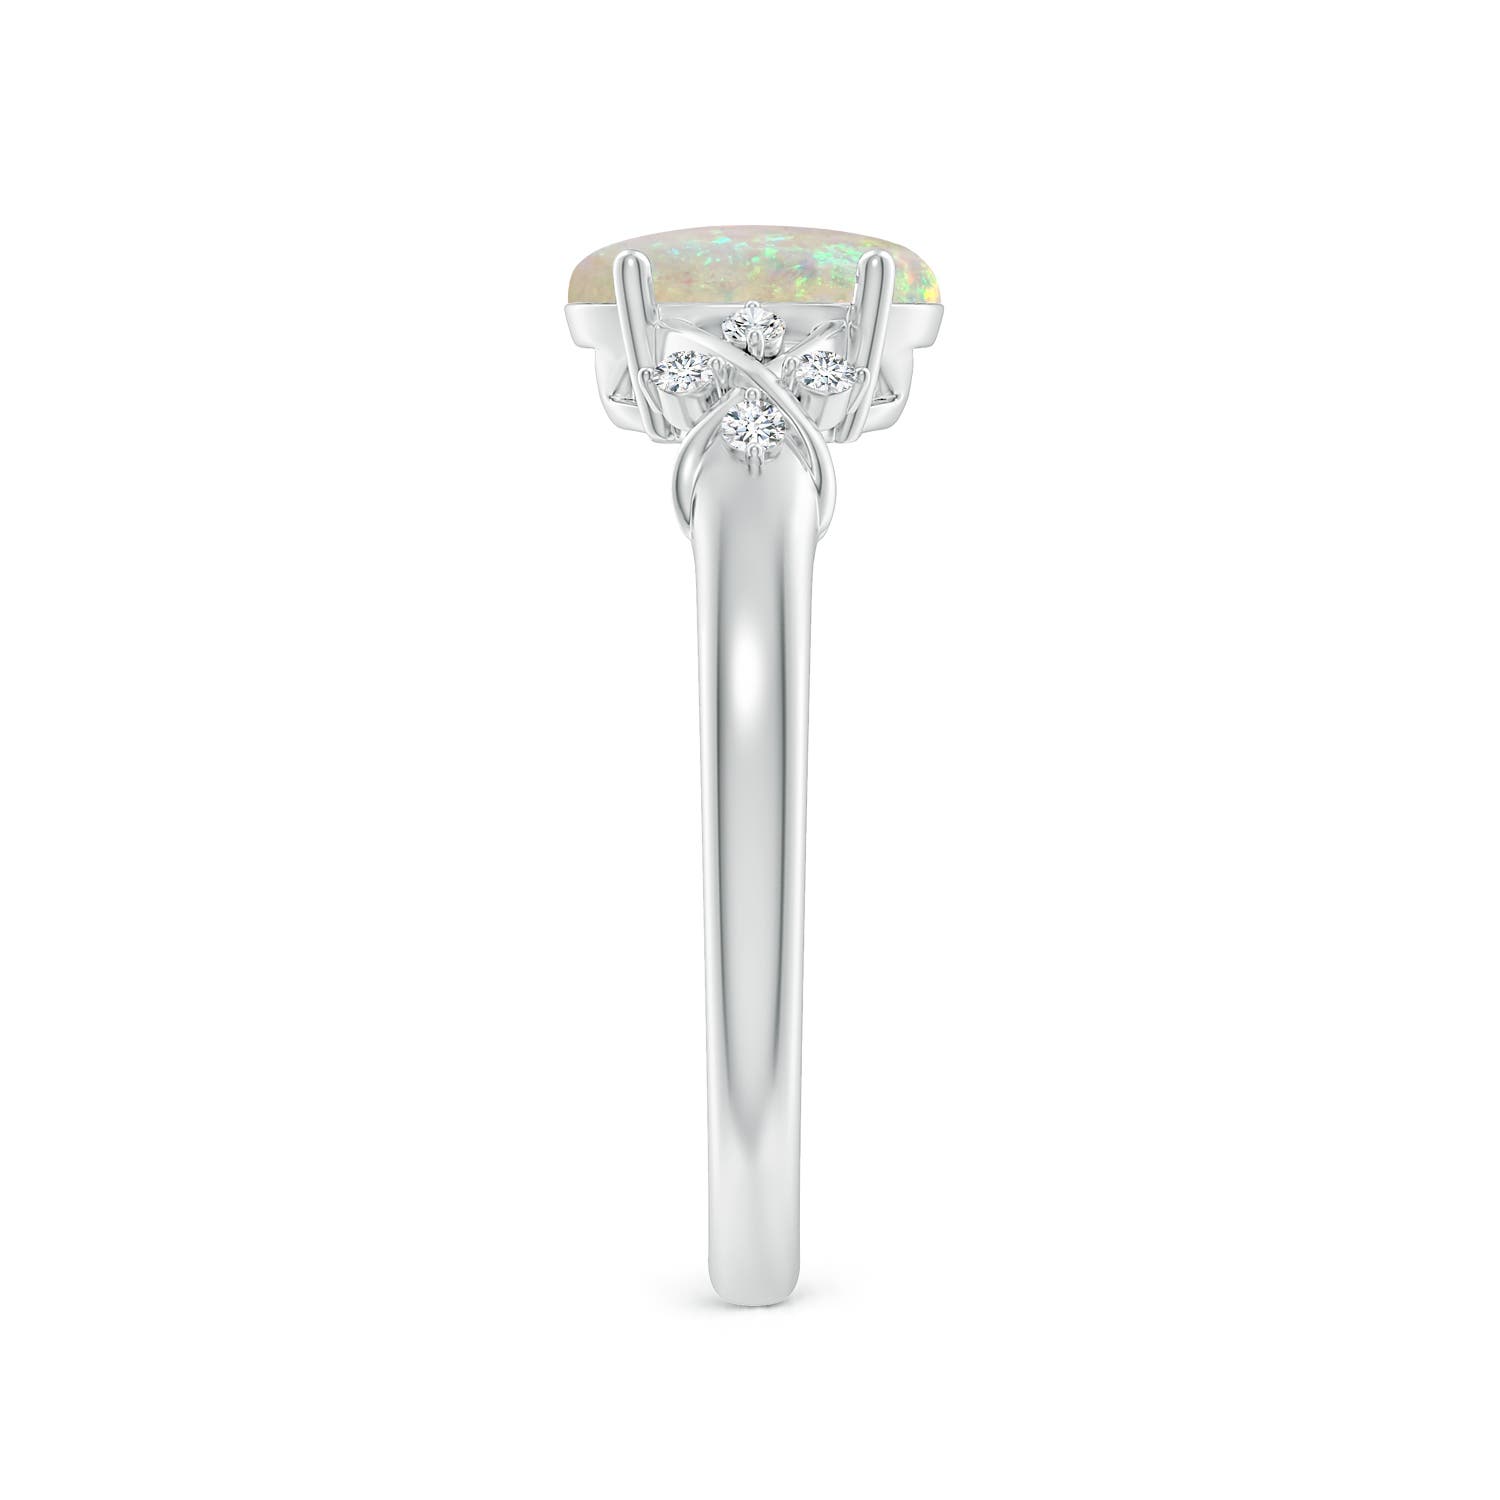 AAA - Opal / 0.88 CT / 14 KT White Gold